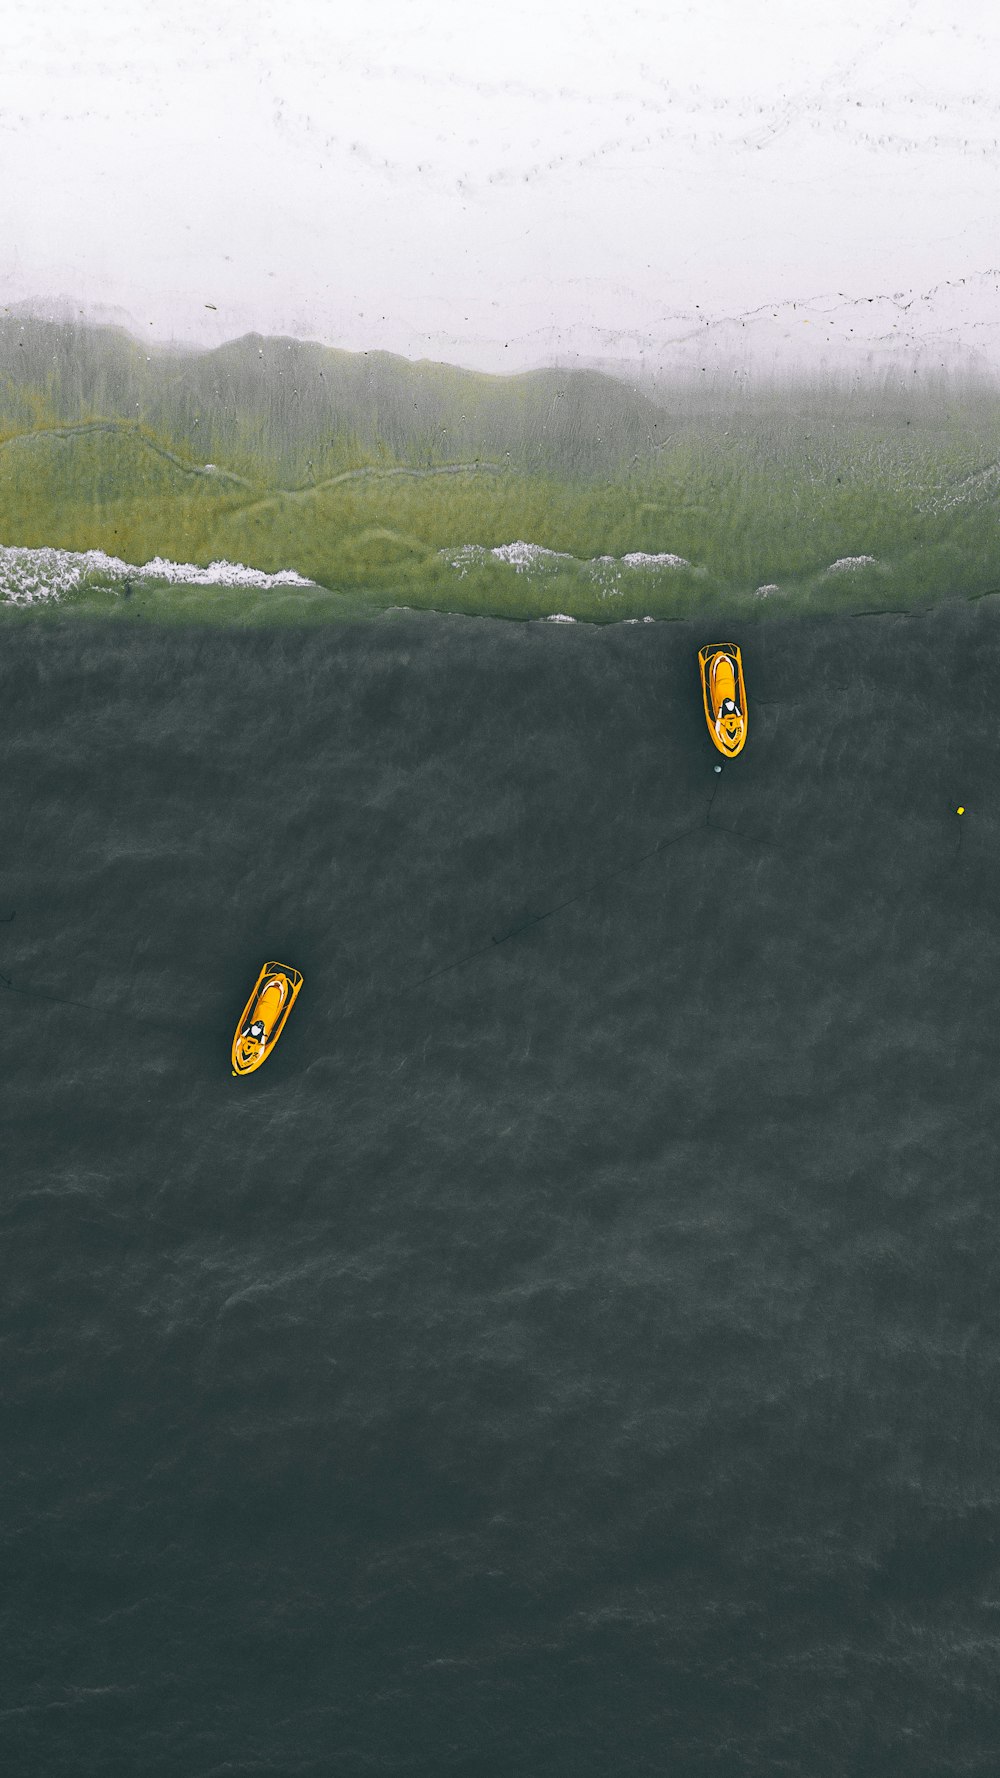 two yellow personal watercraft on water